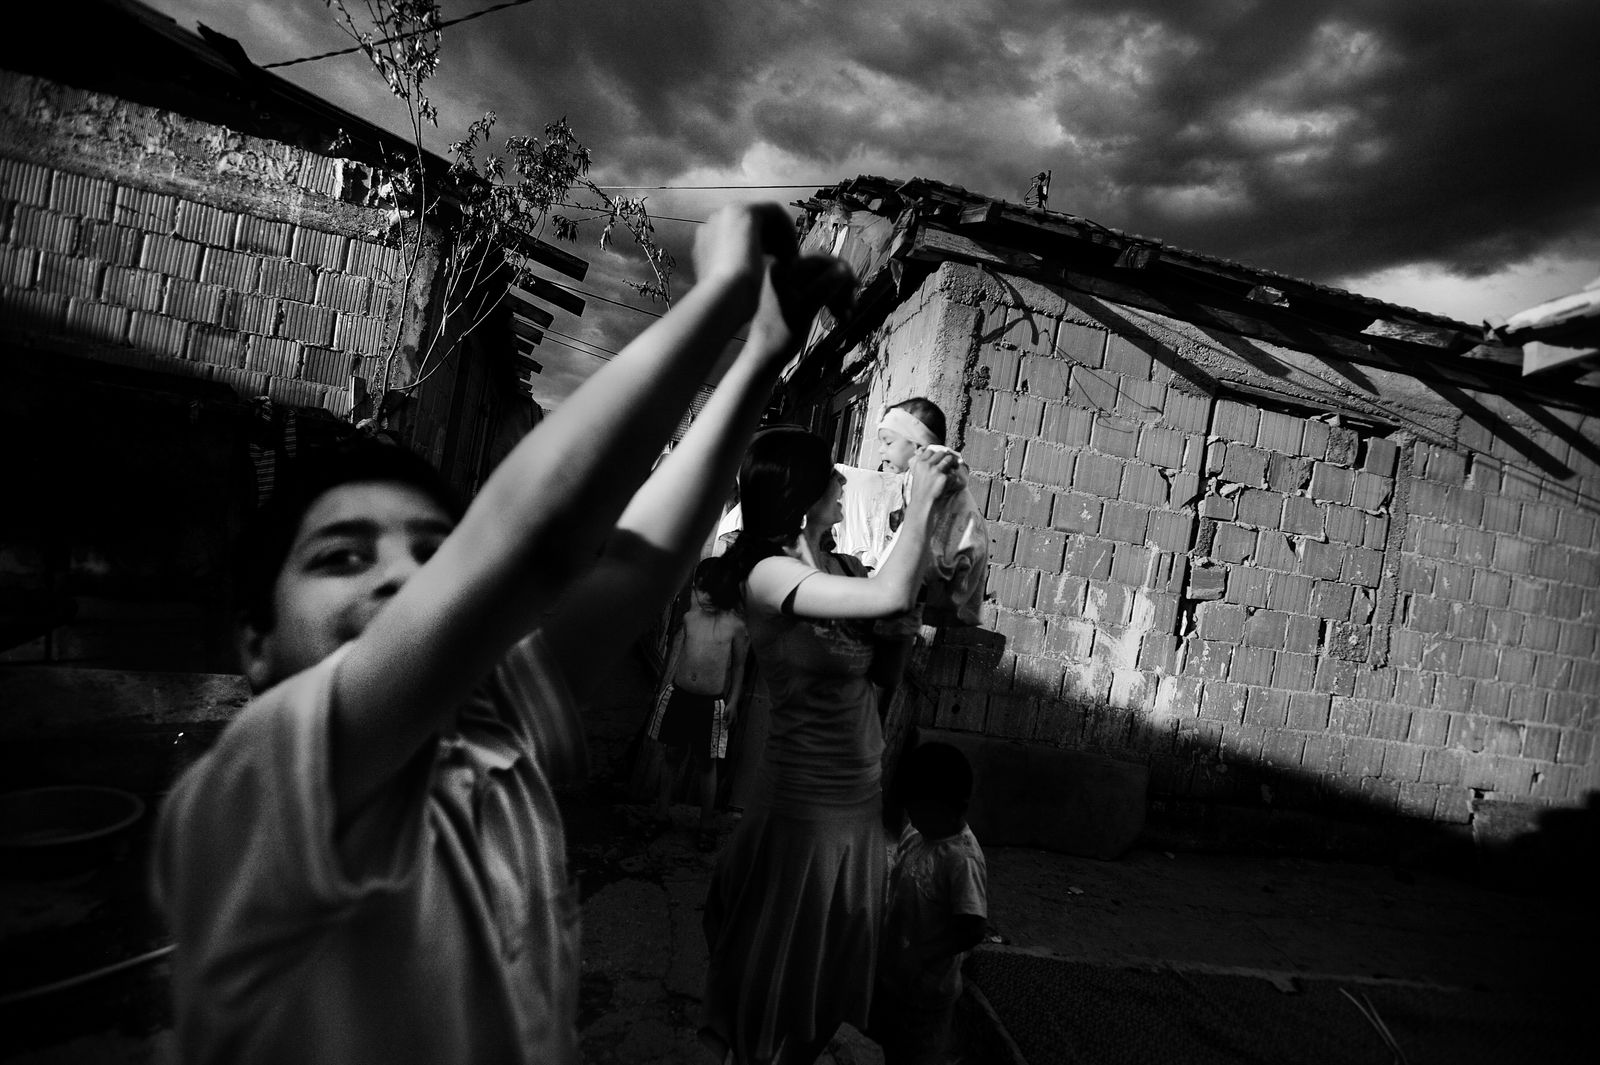 © Annalisa Natali Murri - Image from the Bad People Don't Sing photography project